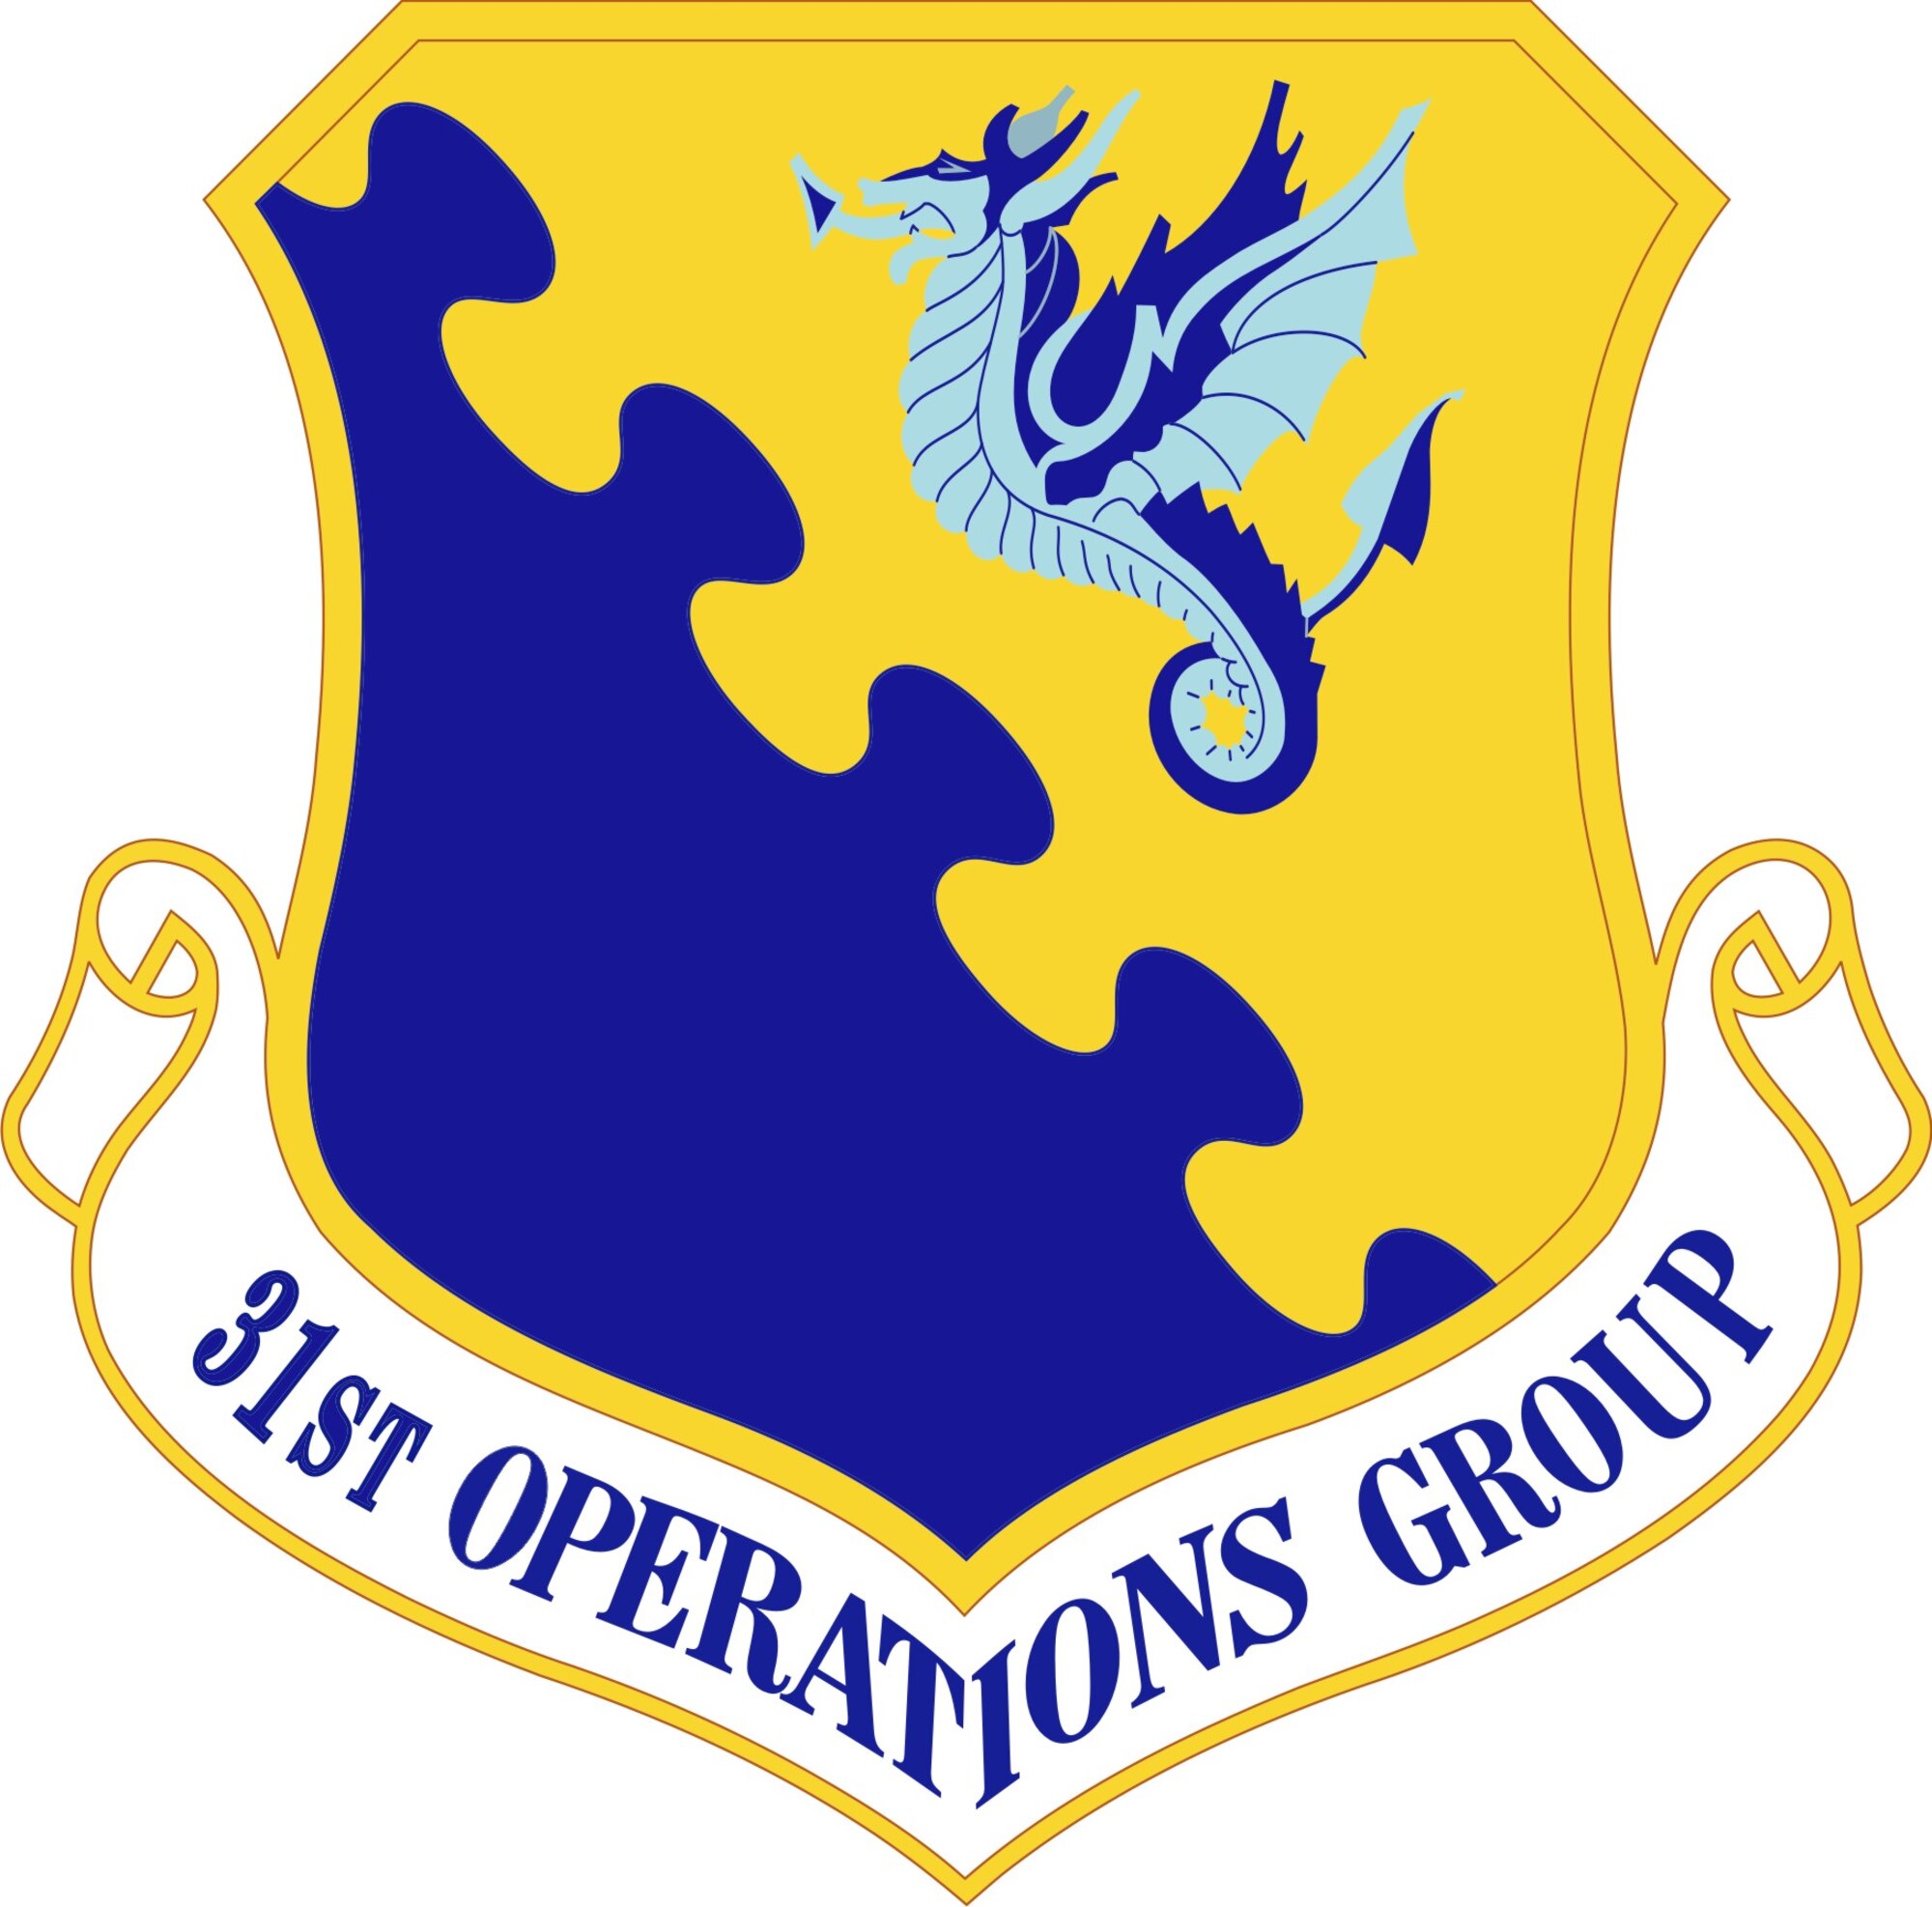 31st Operations Group Shield 